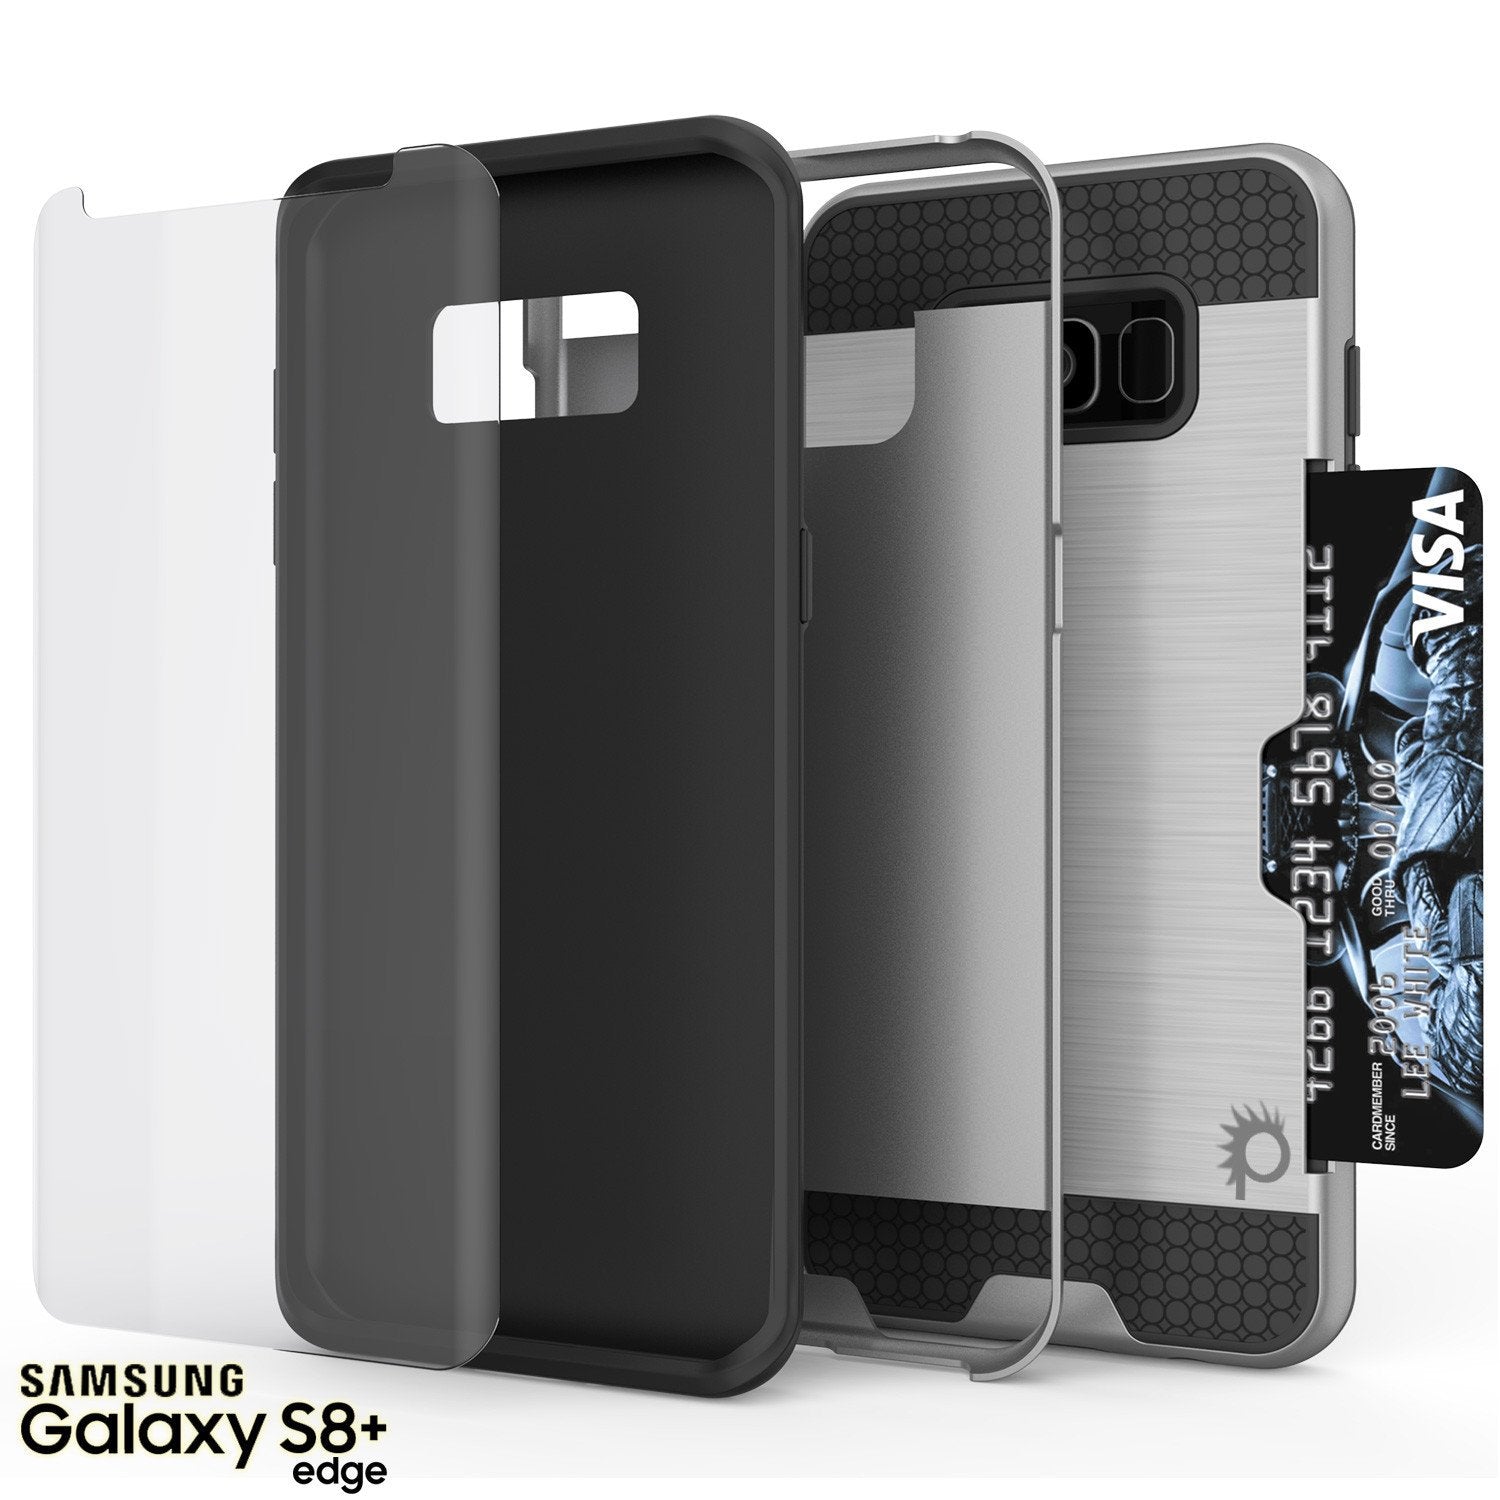 Galaxy S8 Plus Case, PUNKcase [SLOT Series] [Slim Fit] Dual-Layer Armor Cover w/Integrated Anti-Shock System, Credit Card Slot & PunkShield Screen Protector for Samsung Galaxy S8+ [Silver] - PunkCase NZ